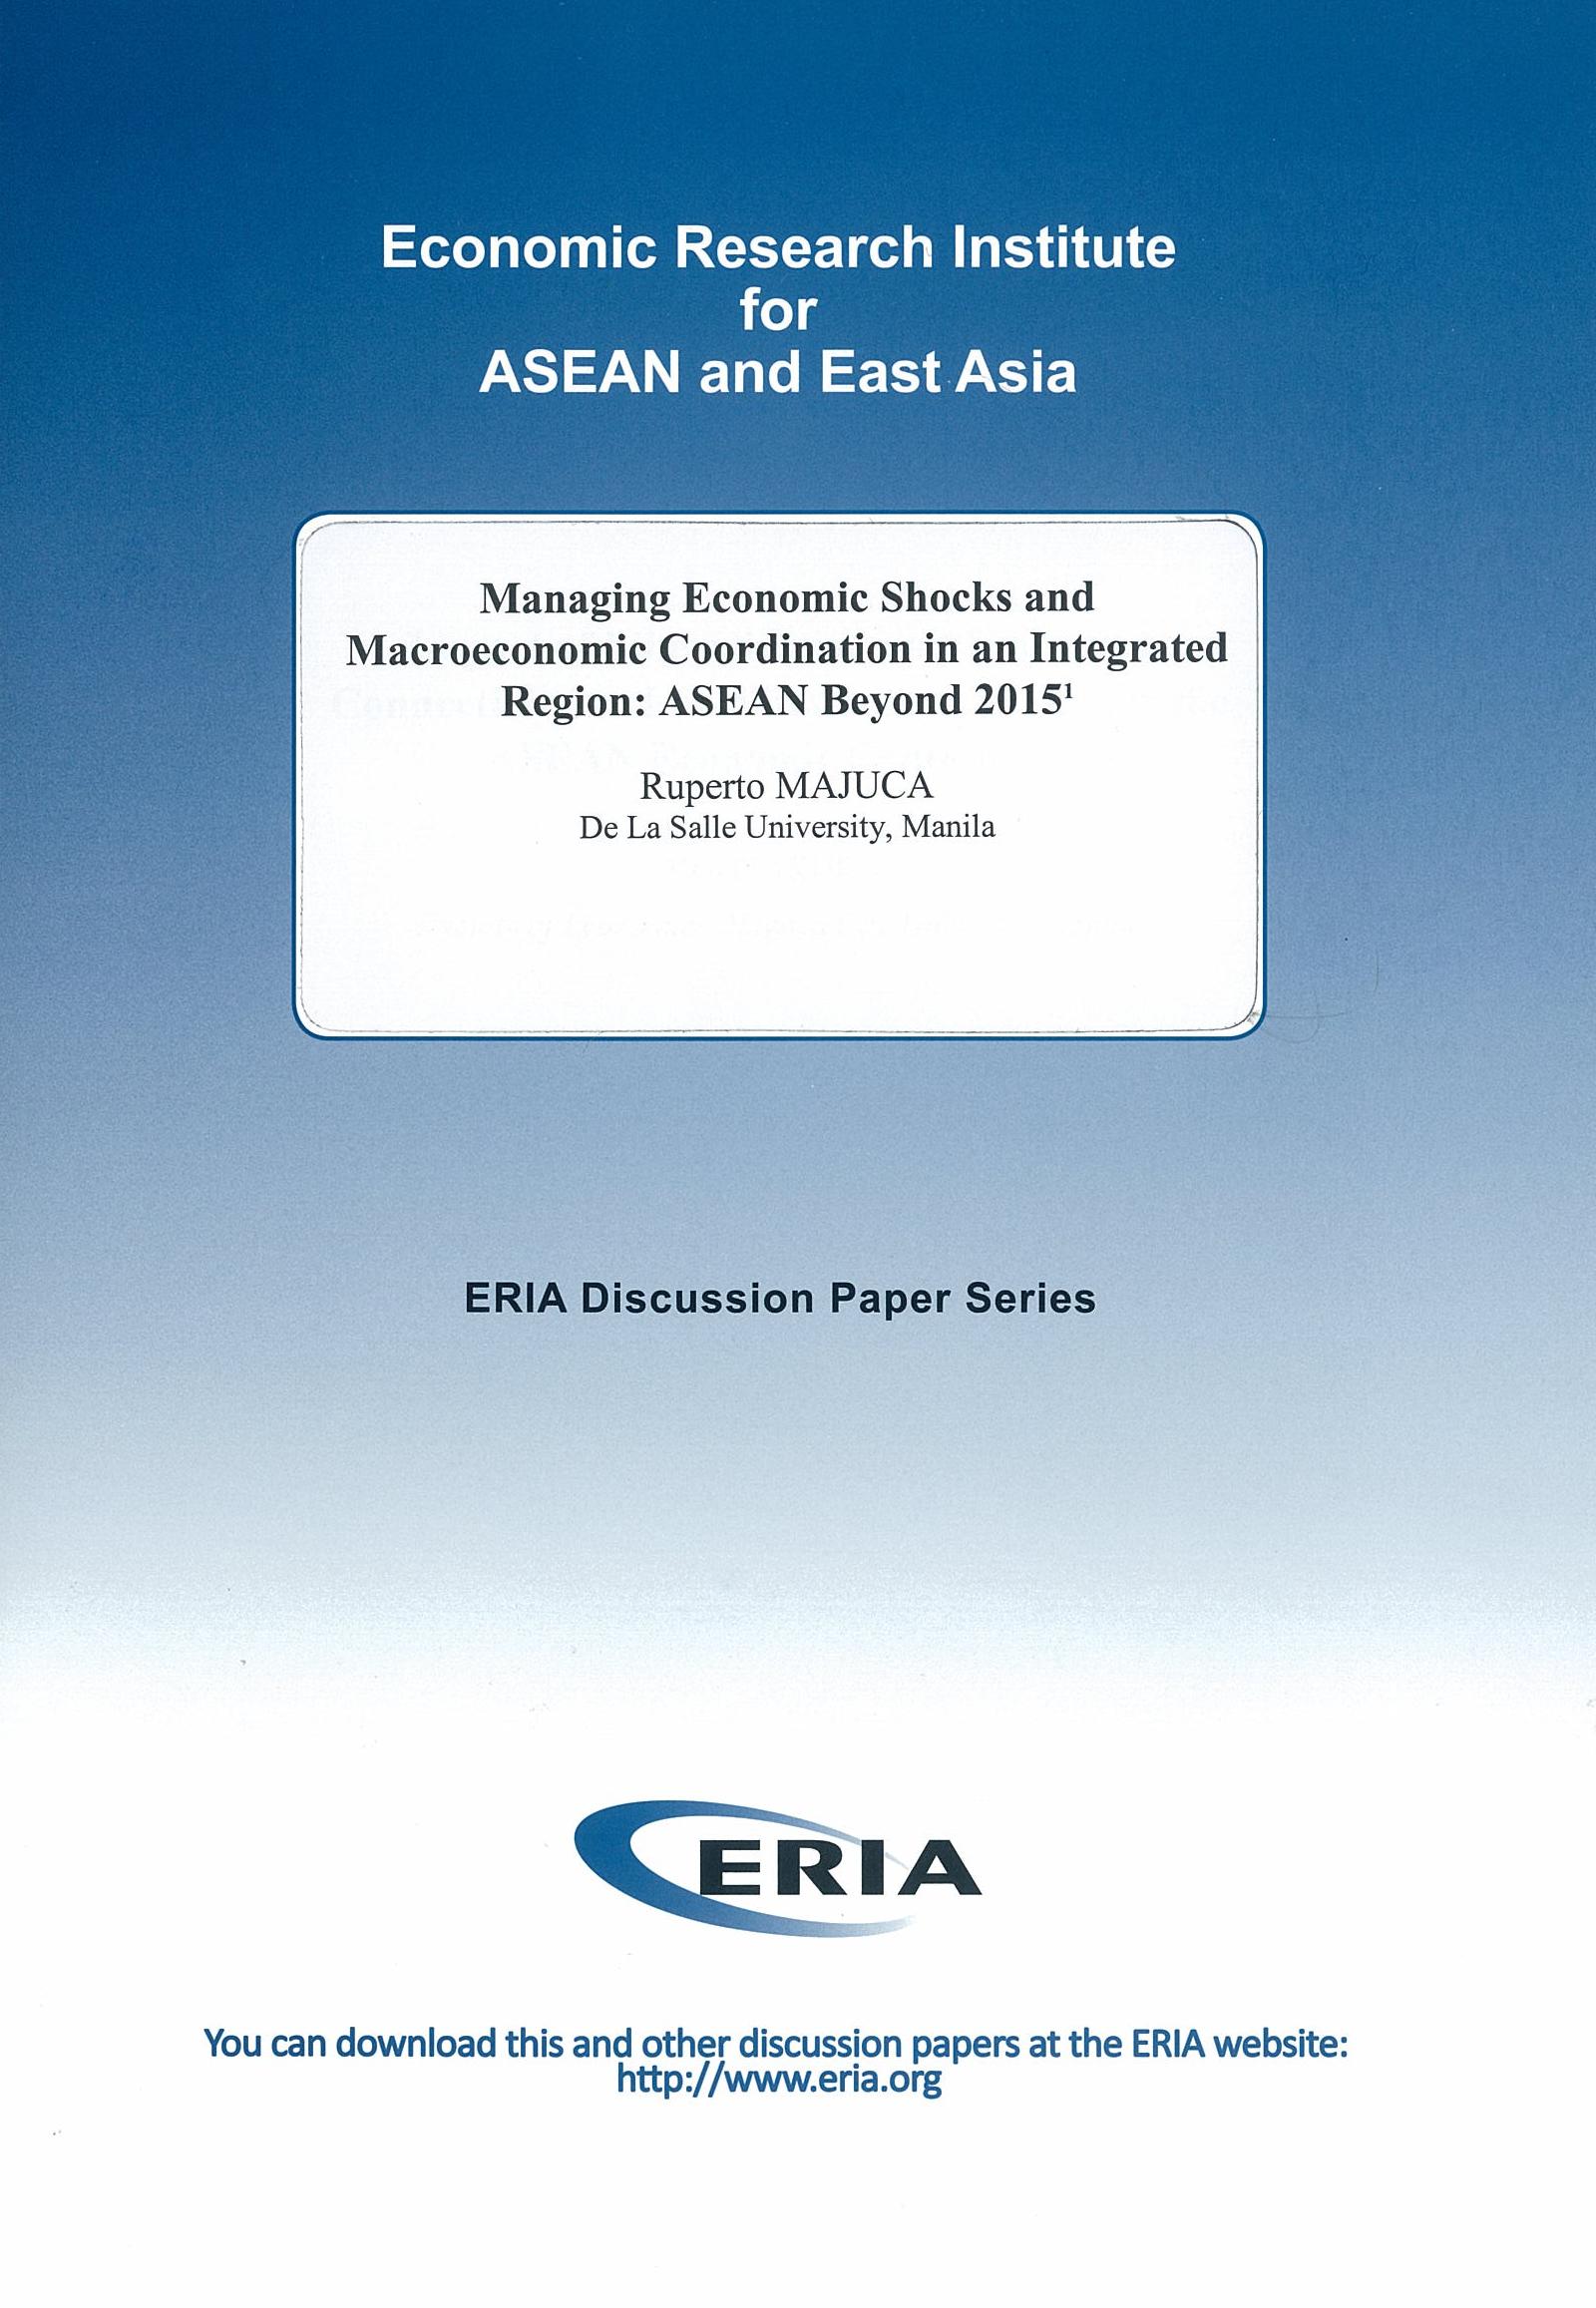 Managing Economic Shocks and Macroeconomic Coordination in an Integrated Region: ASEAN Beyond 2015